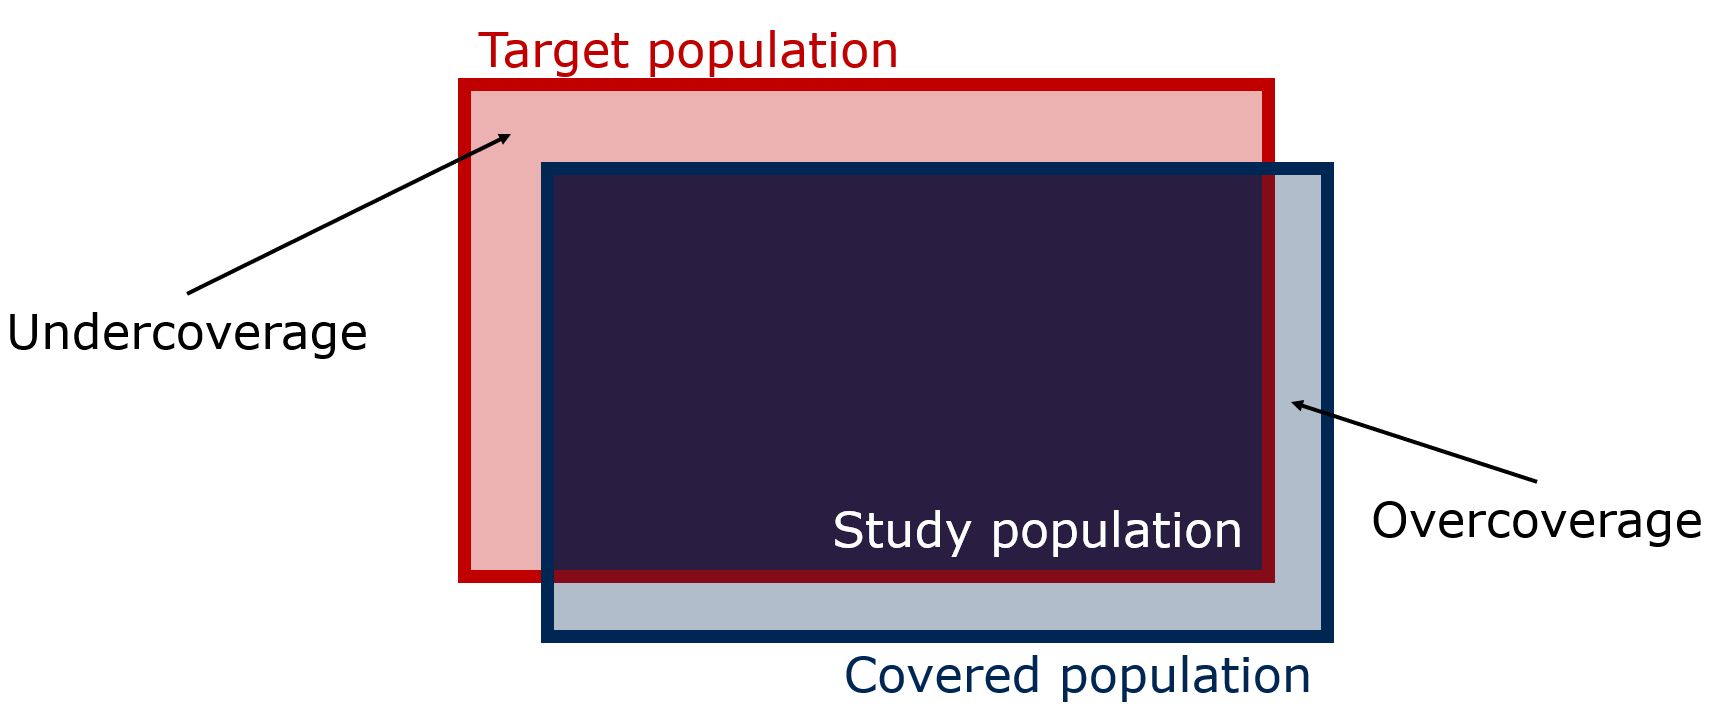 Target population, covered population, and study population